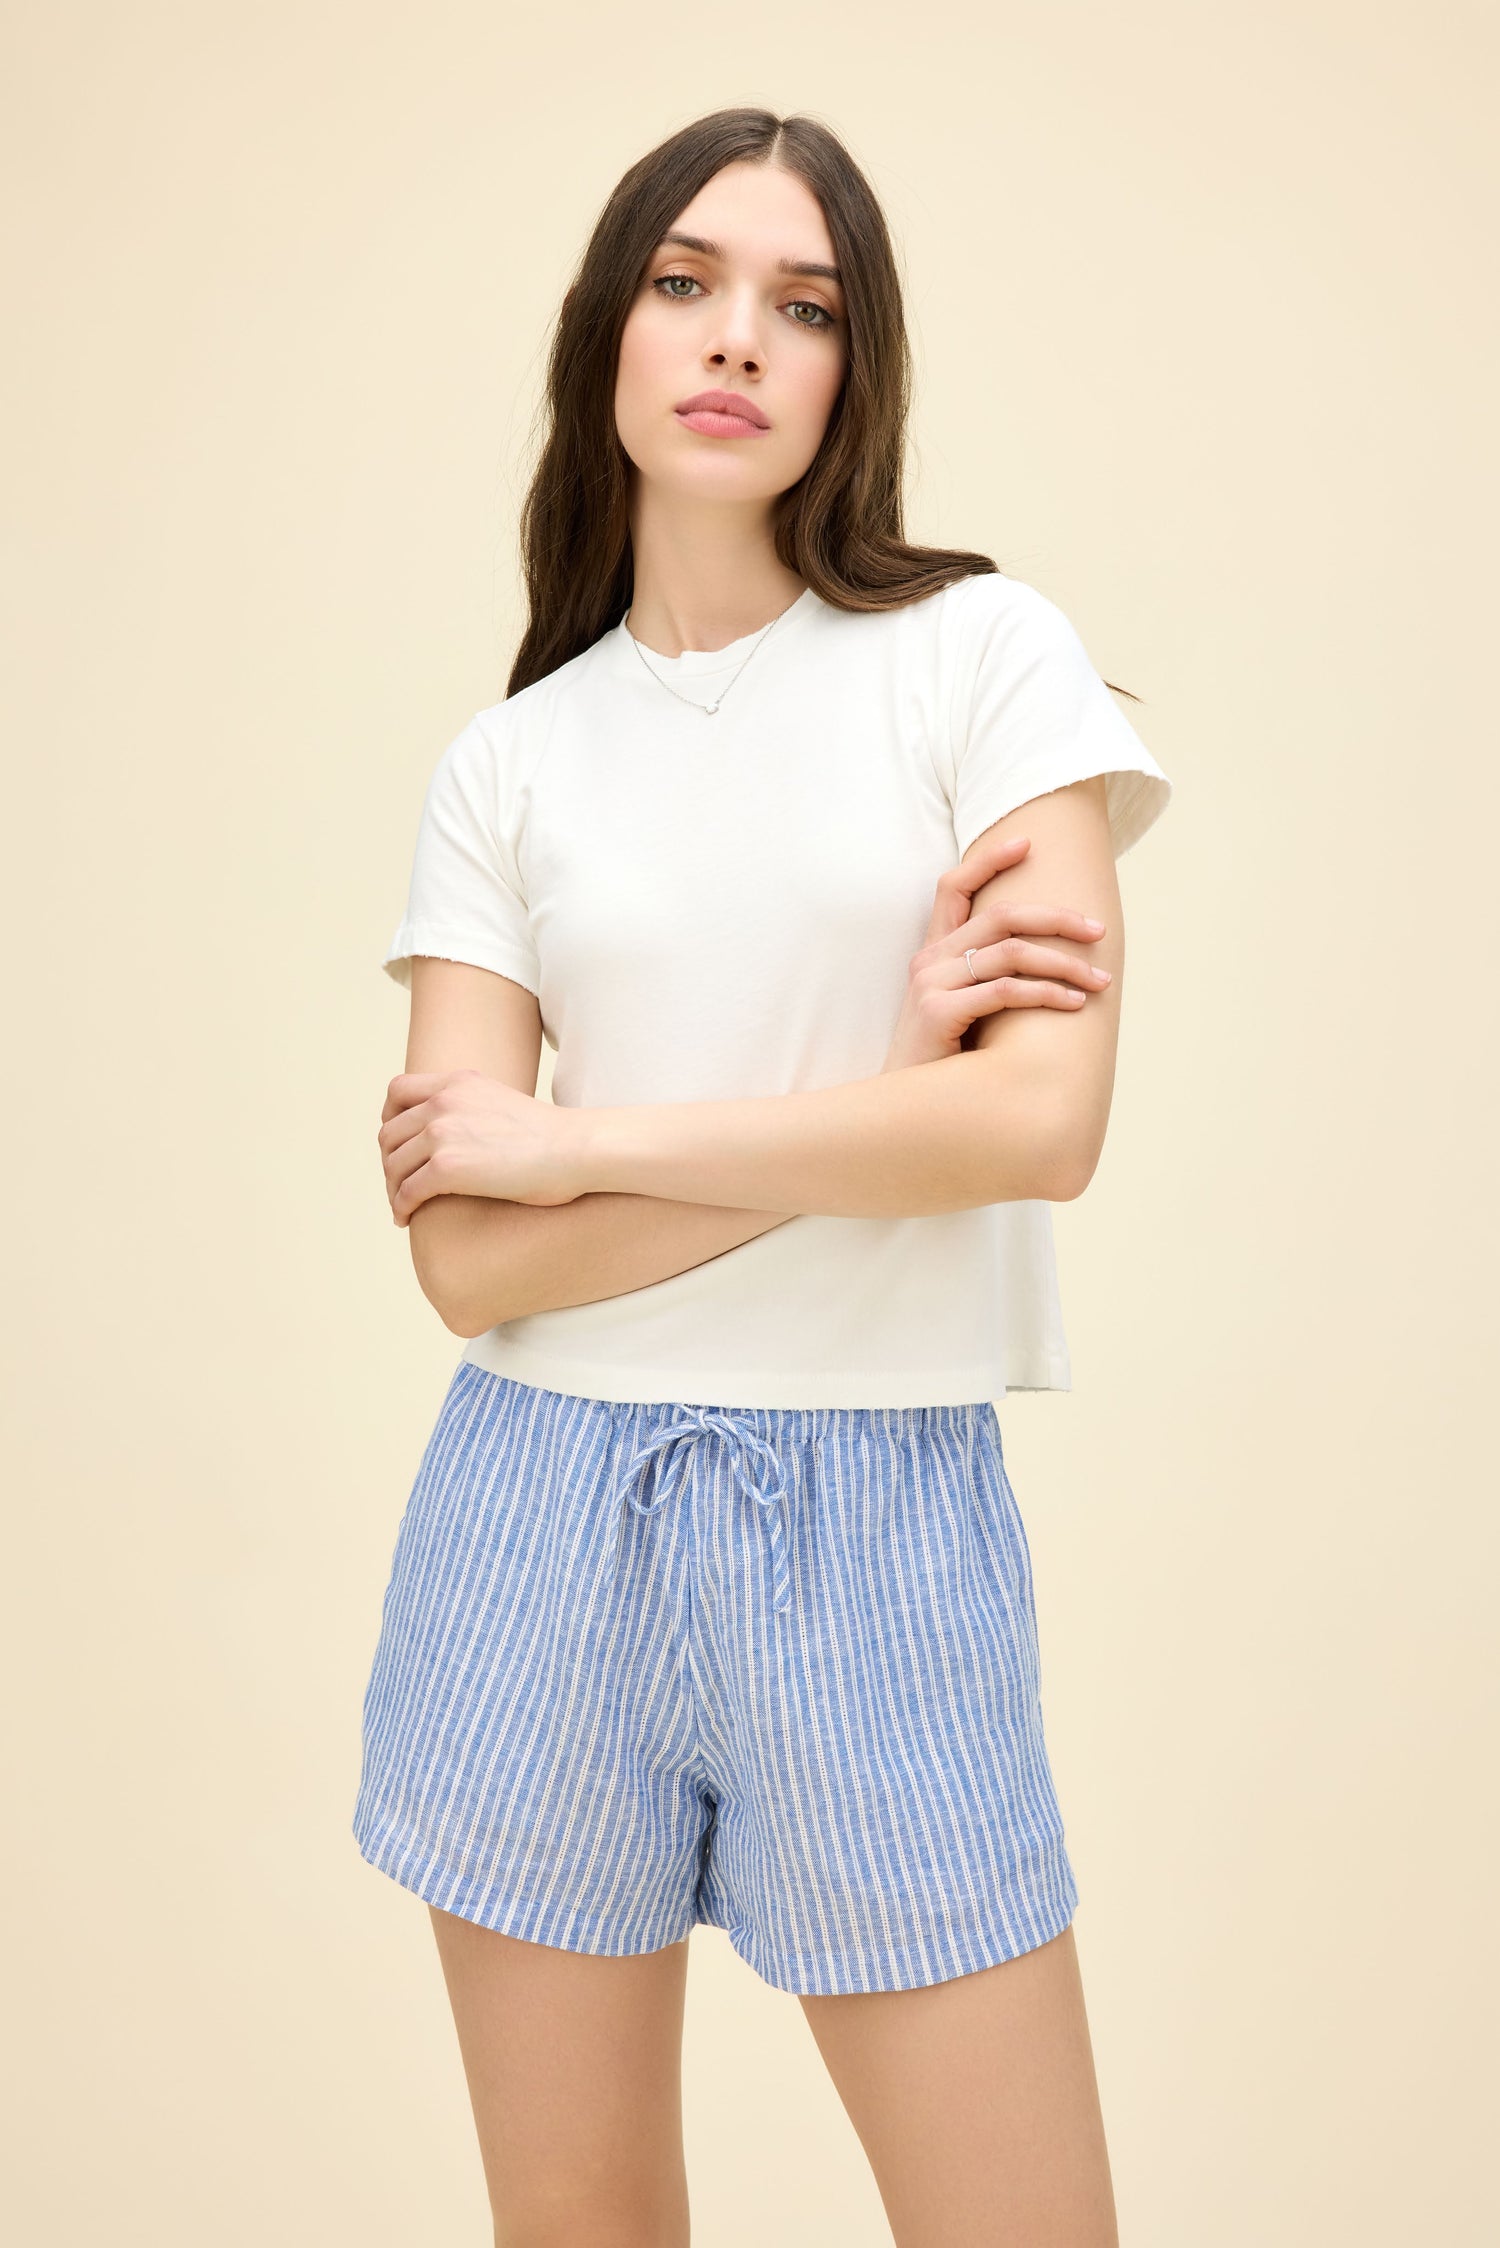 A model featuring a vintage tee in vintage white.